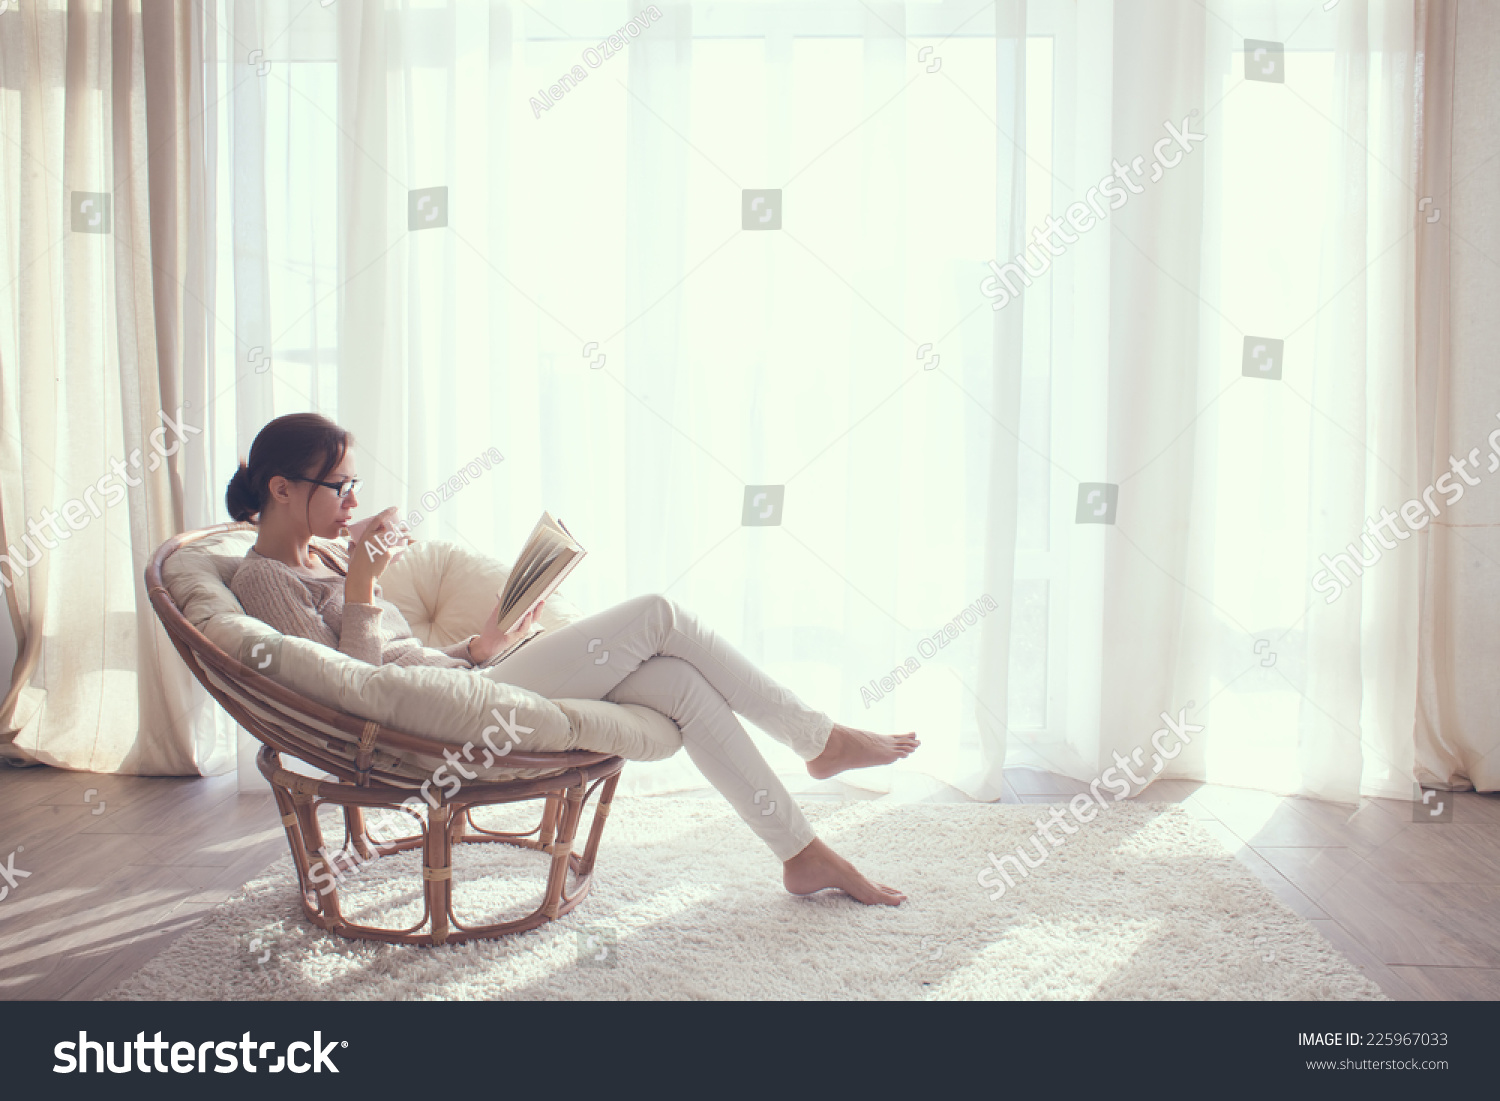 Young woman at home sitting on modern chair in front of window relaxing in her living room reading book and drinking coffee or tea #225967033